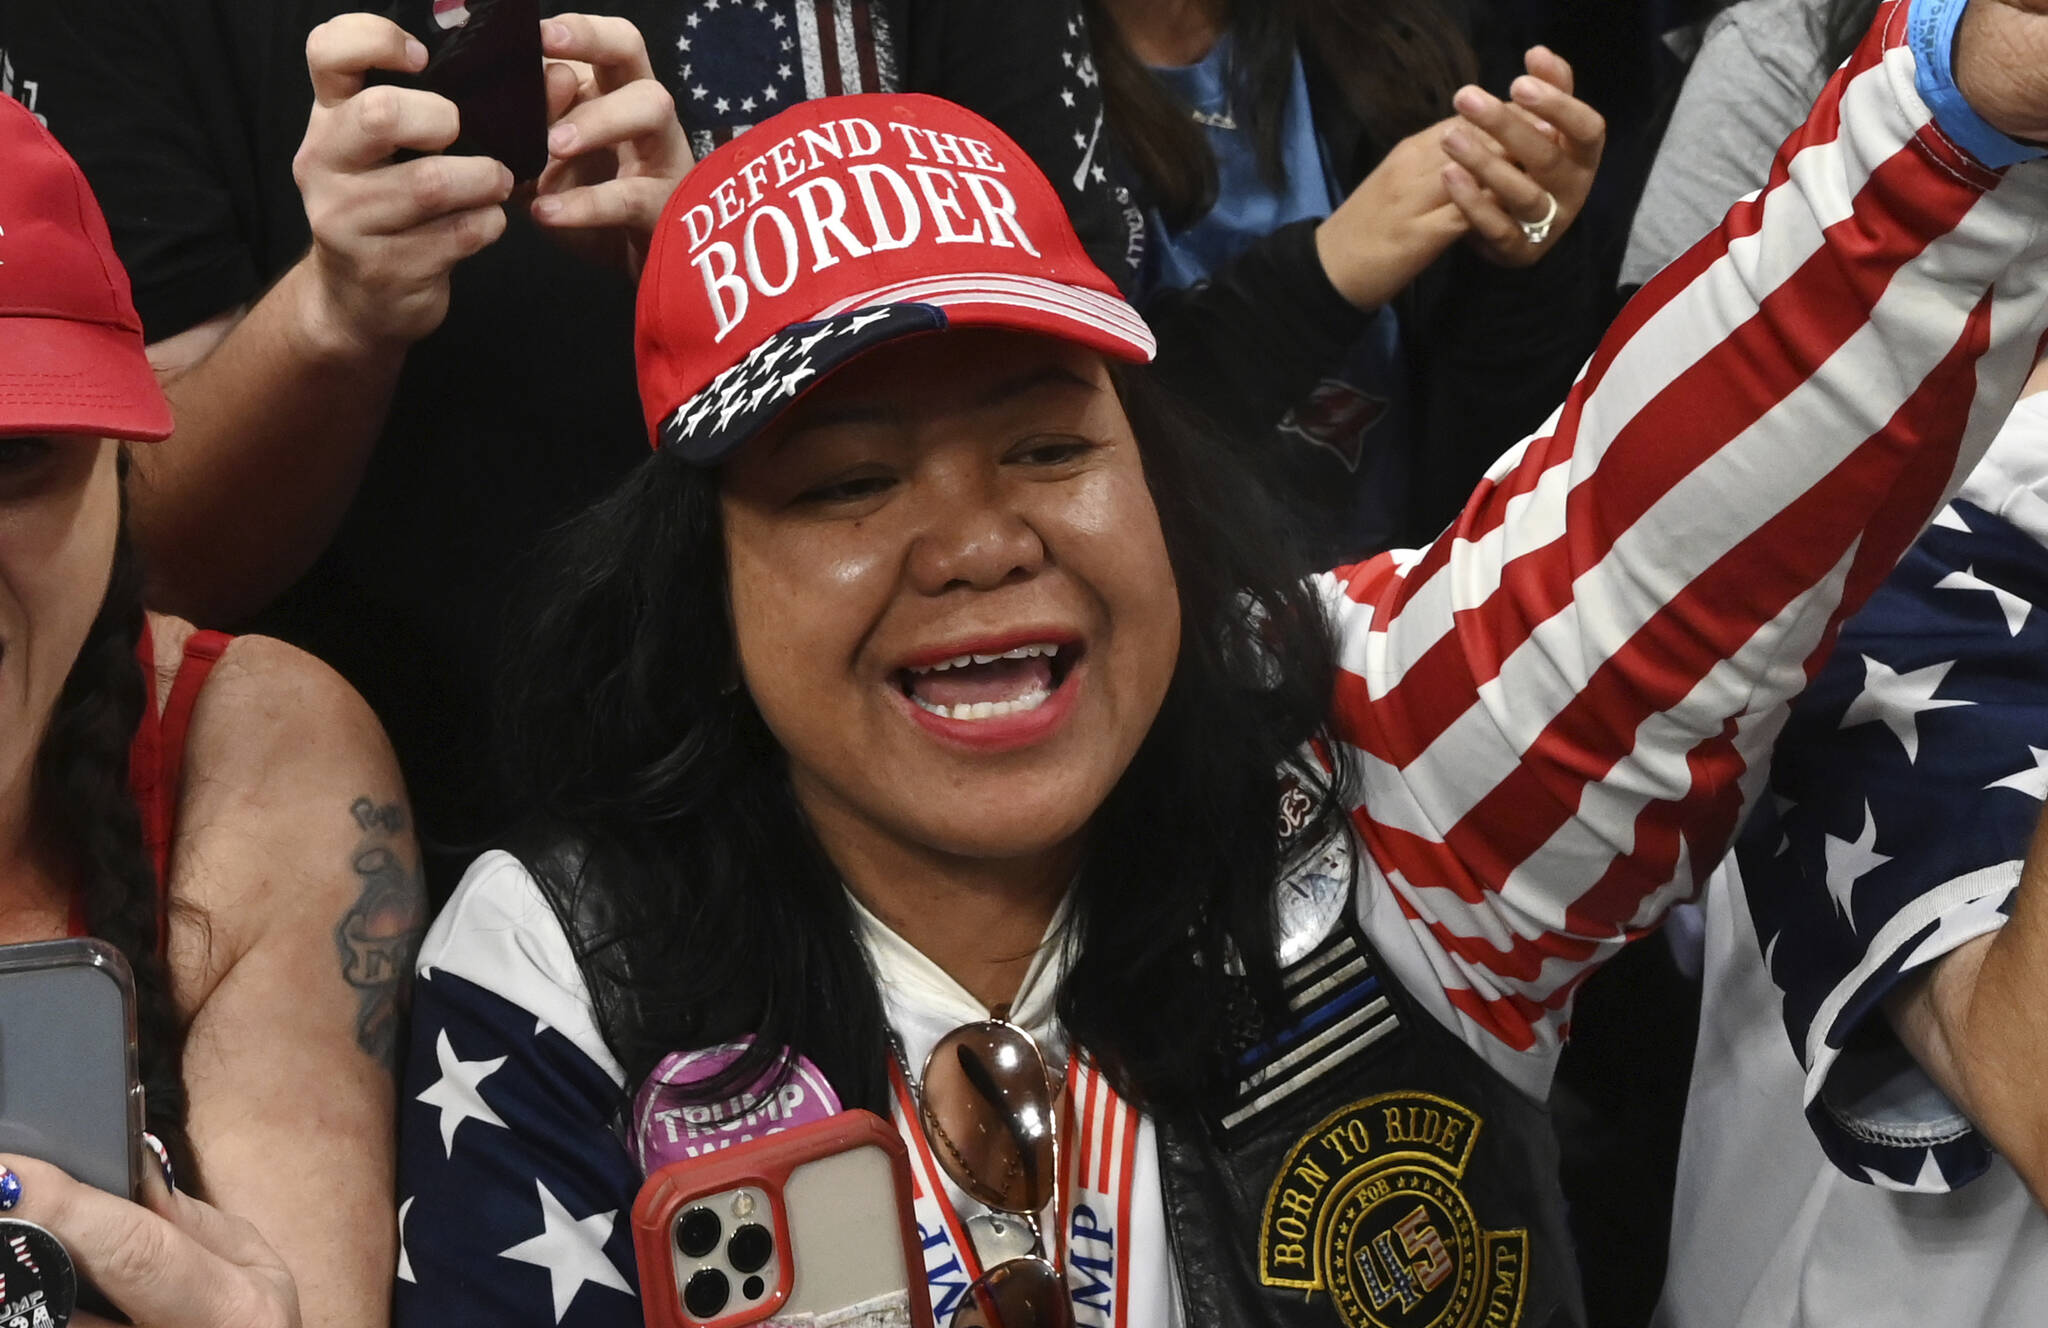 Mimi Israelah, center, cheers for Donald Trump inside the Alaska Airlines Center in Anchorage, Alaska, during a rally Saturday July 9, 2022. An investigation has been launched after a person believed to be an Anchorage, Alaska, police officer was shown in a photo with Israelah flashing a novelty “White Privilege card.” The social media post caused concerns about racial equality in Alaska’s largest city.  (Bill Roth / Anchorage Daily News)